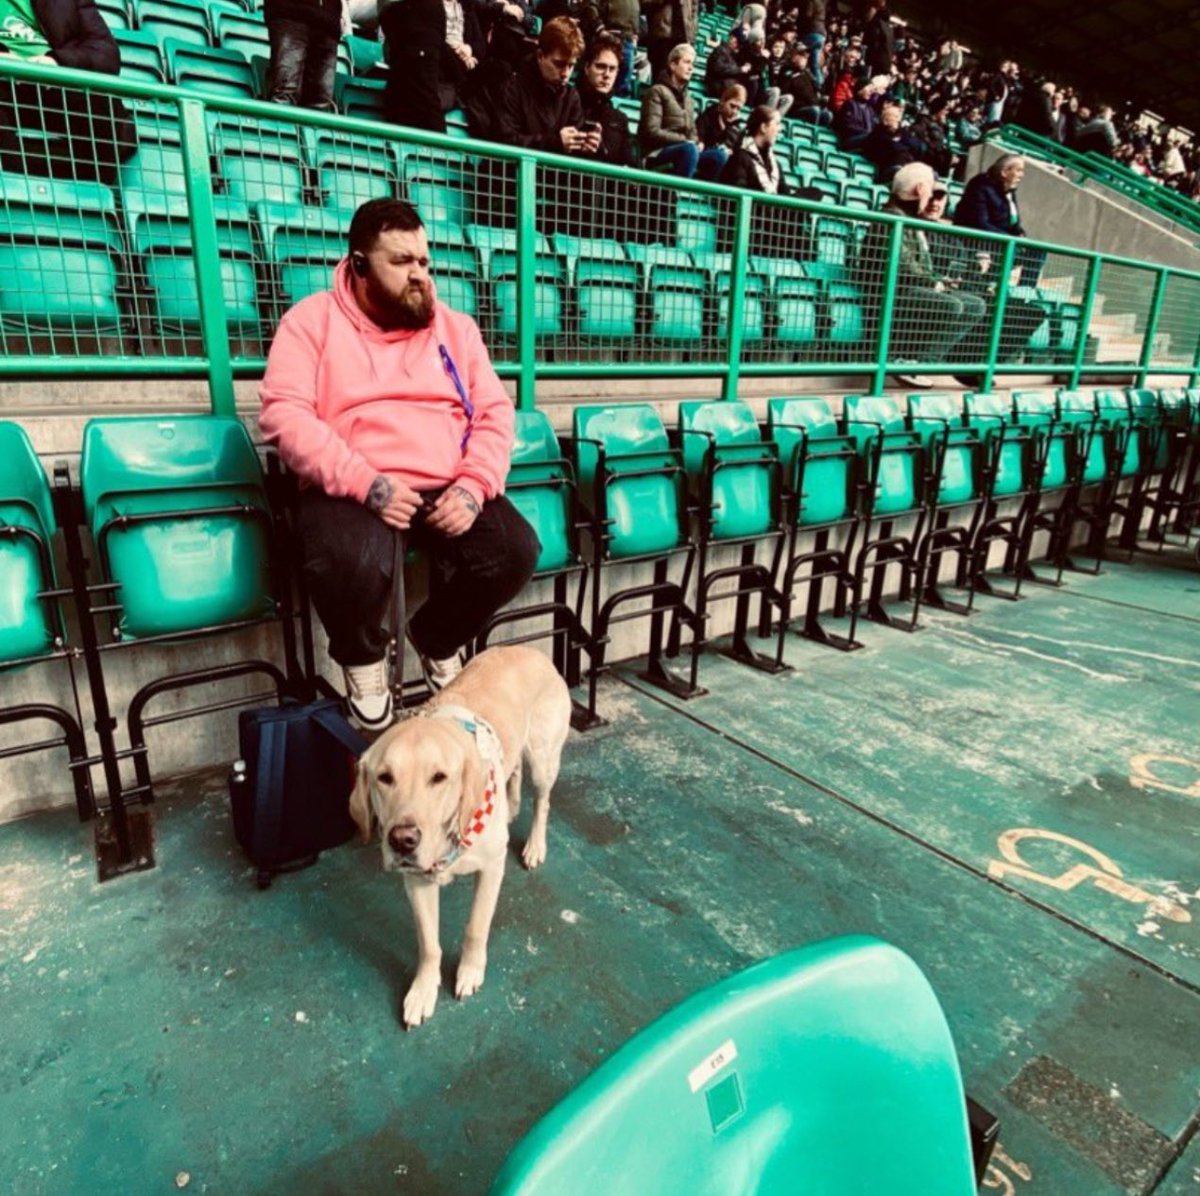 ⚽️ Visiting all 42 @spfl grounds for a game is not easy when you have a visual impairment and relying on public transport 🦮 I get to do it with my best friend Sam though, and without him this journey would not be possible ❤️ Thank you so much to all of you for coming with us